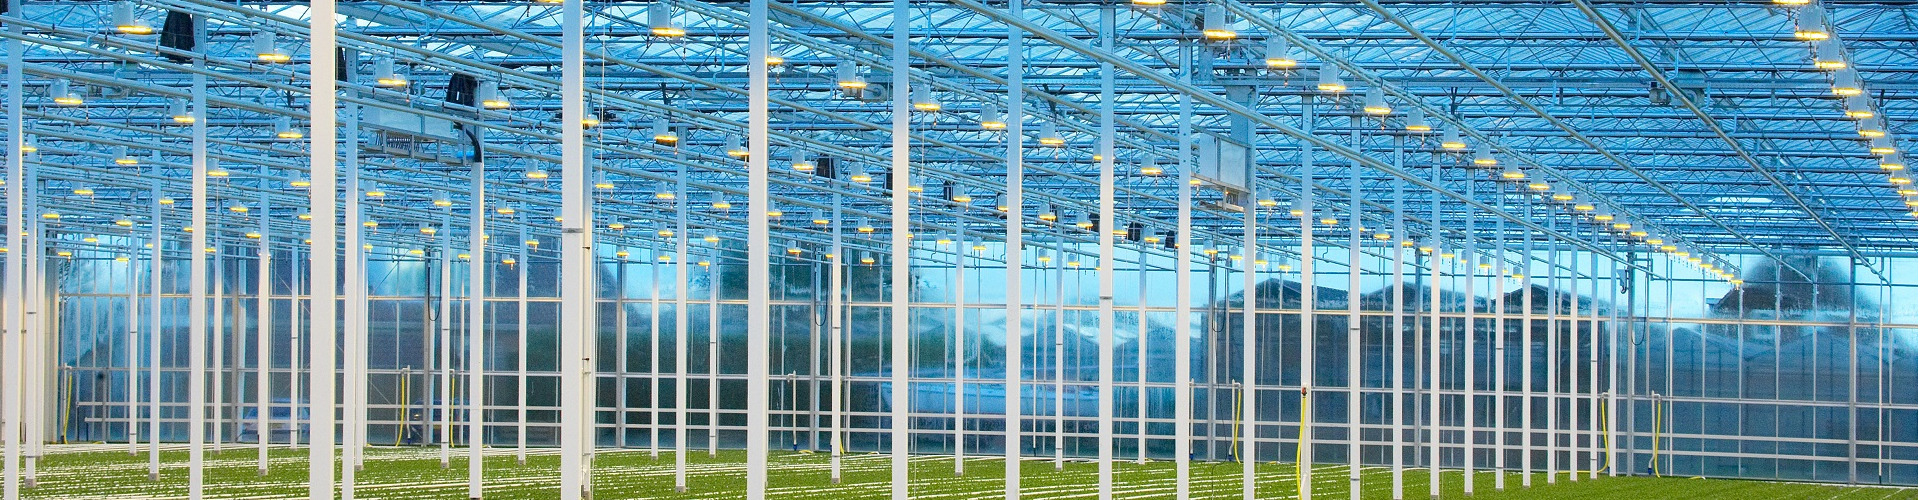 Greenhouse Grow lights and LED systems